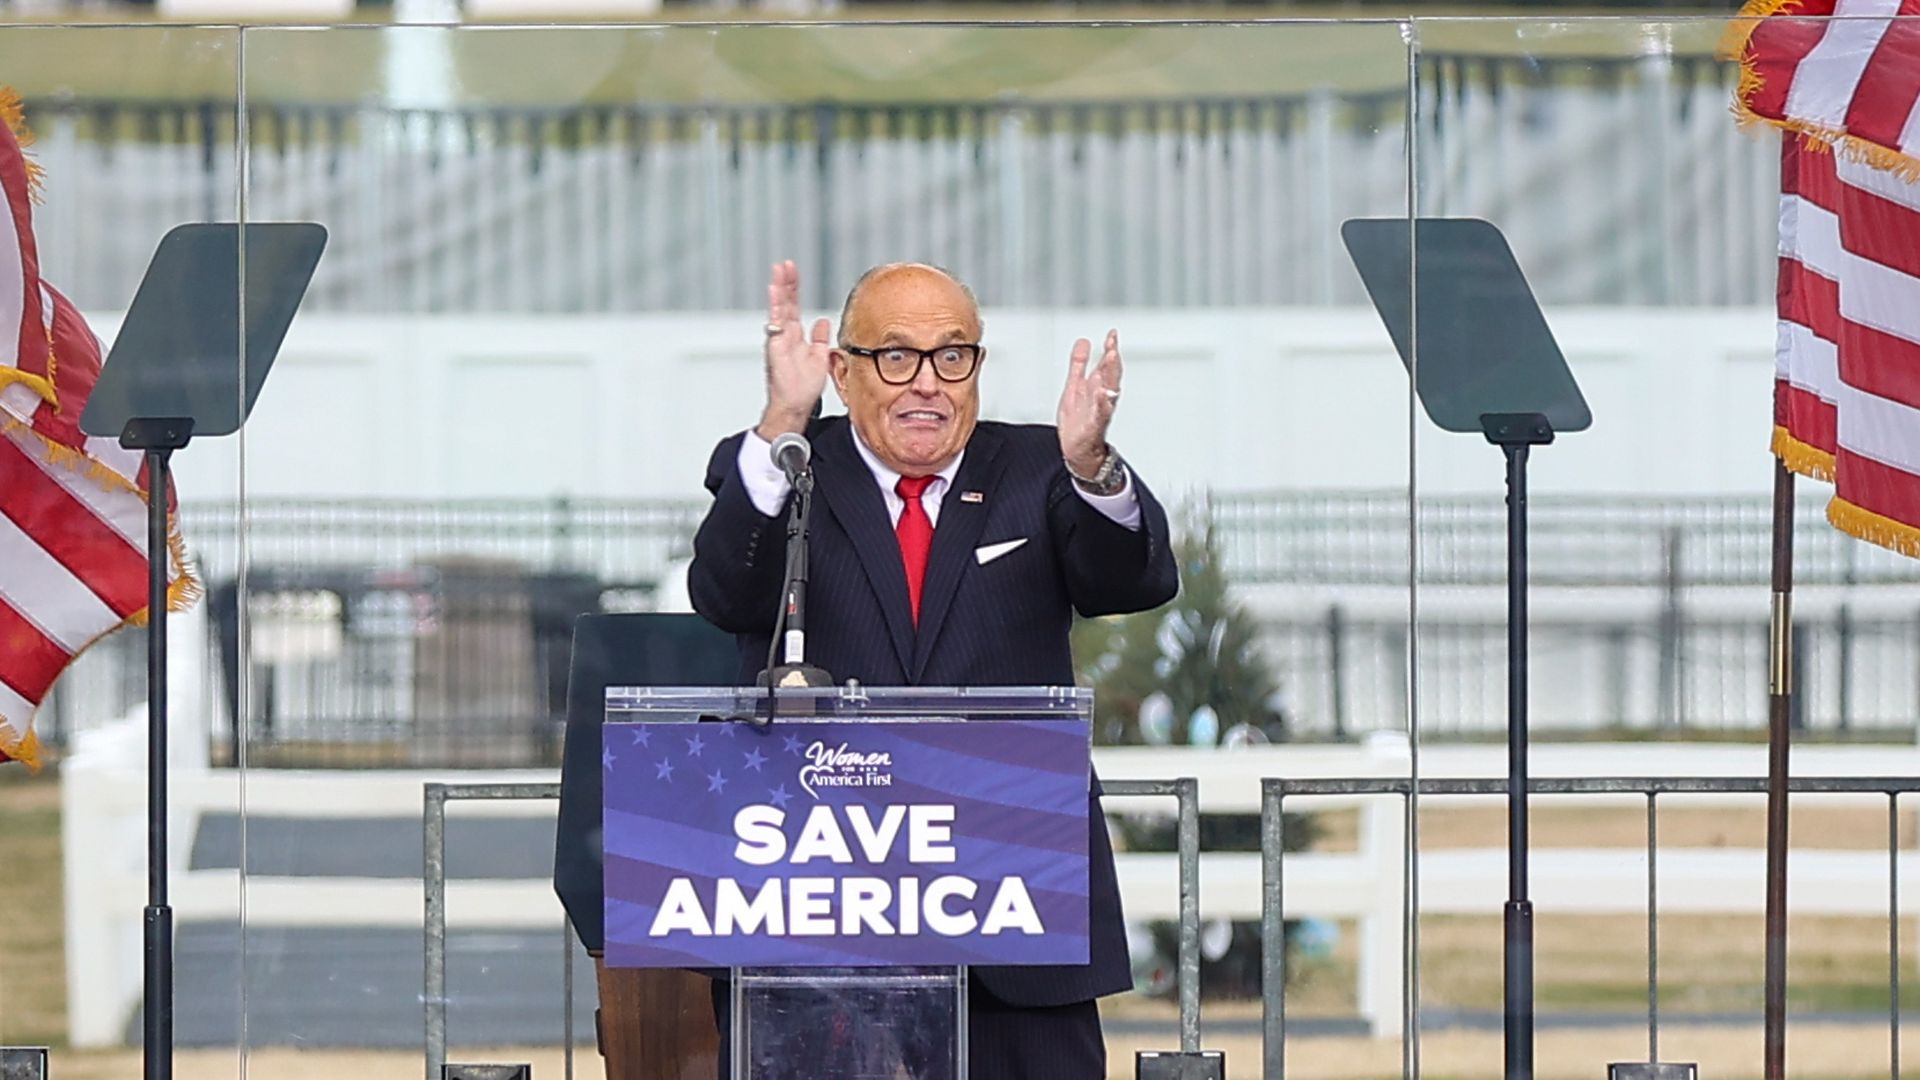 Rudy Giuliani stands at a podium with the sign "Save America" displayed 